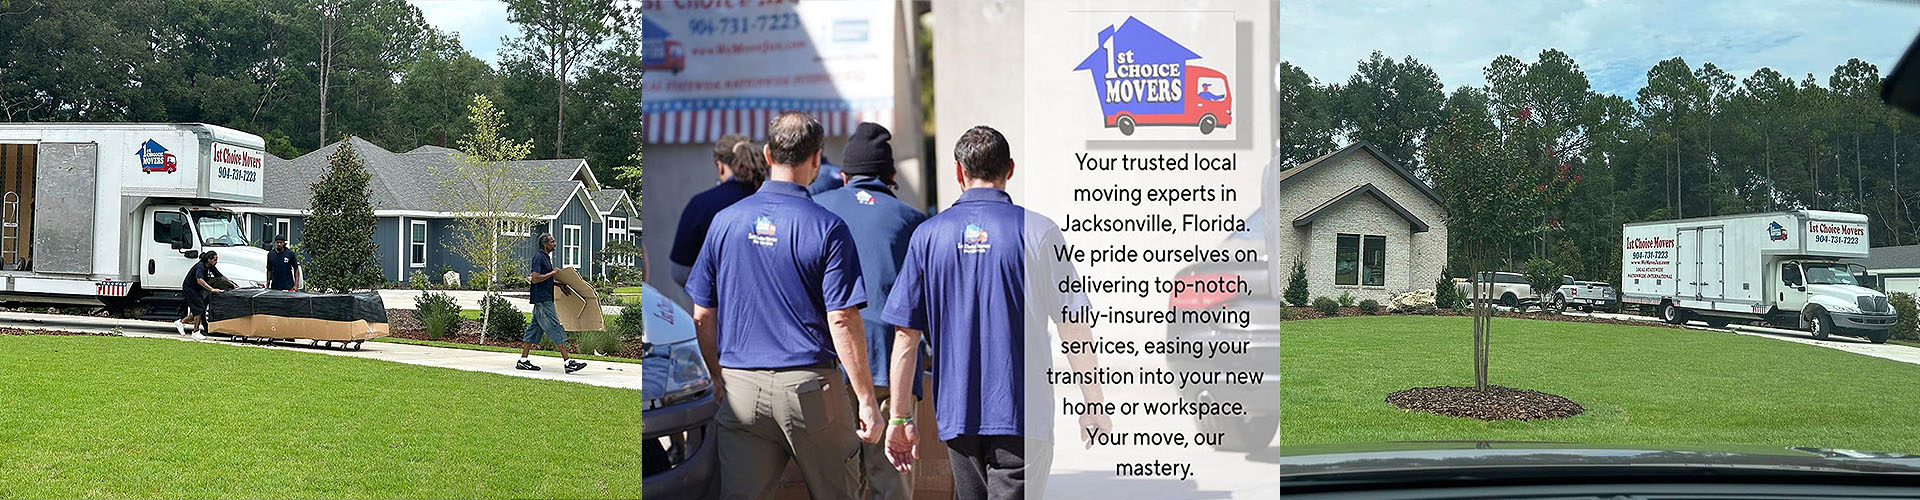 Discover our compassionate senior moving services in Jacksonville, FL.